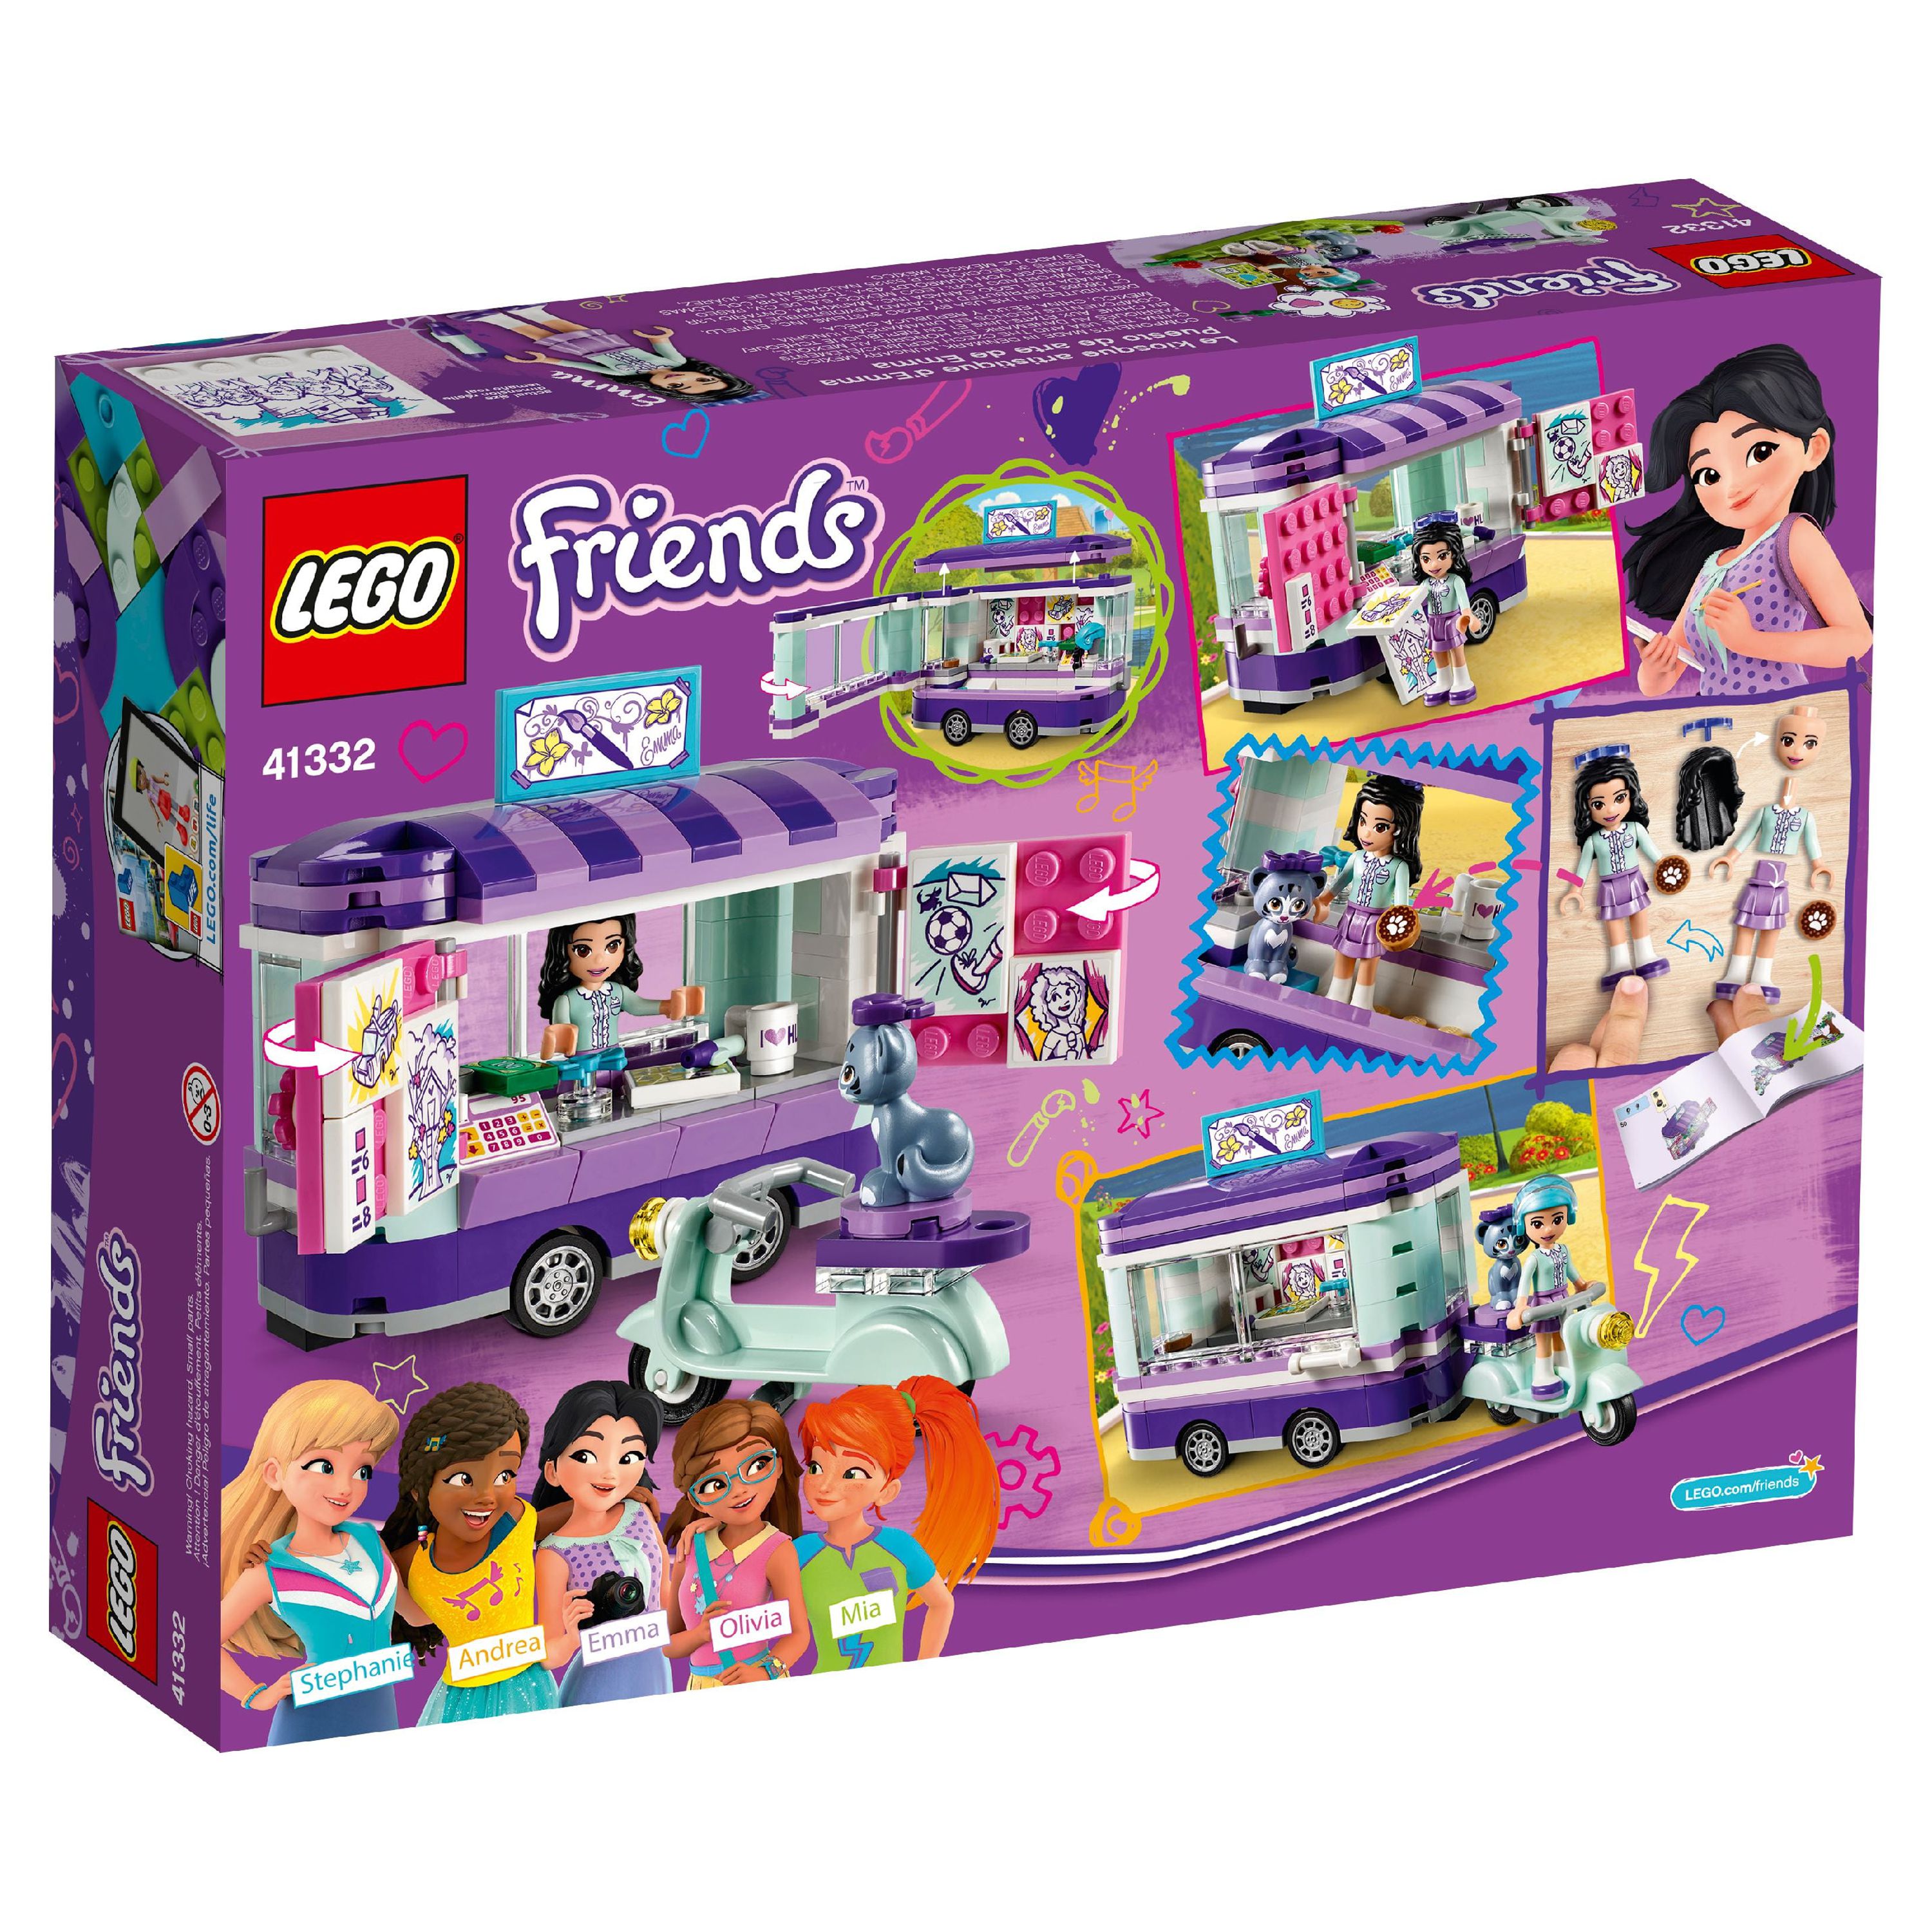 LEGO Friends Emma's Art Stand 41332 - image 5 of 7